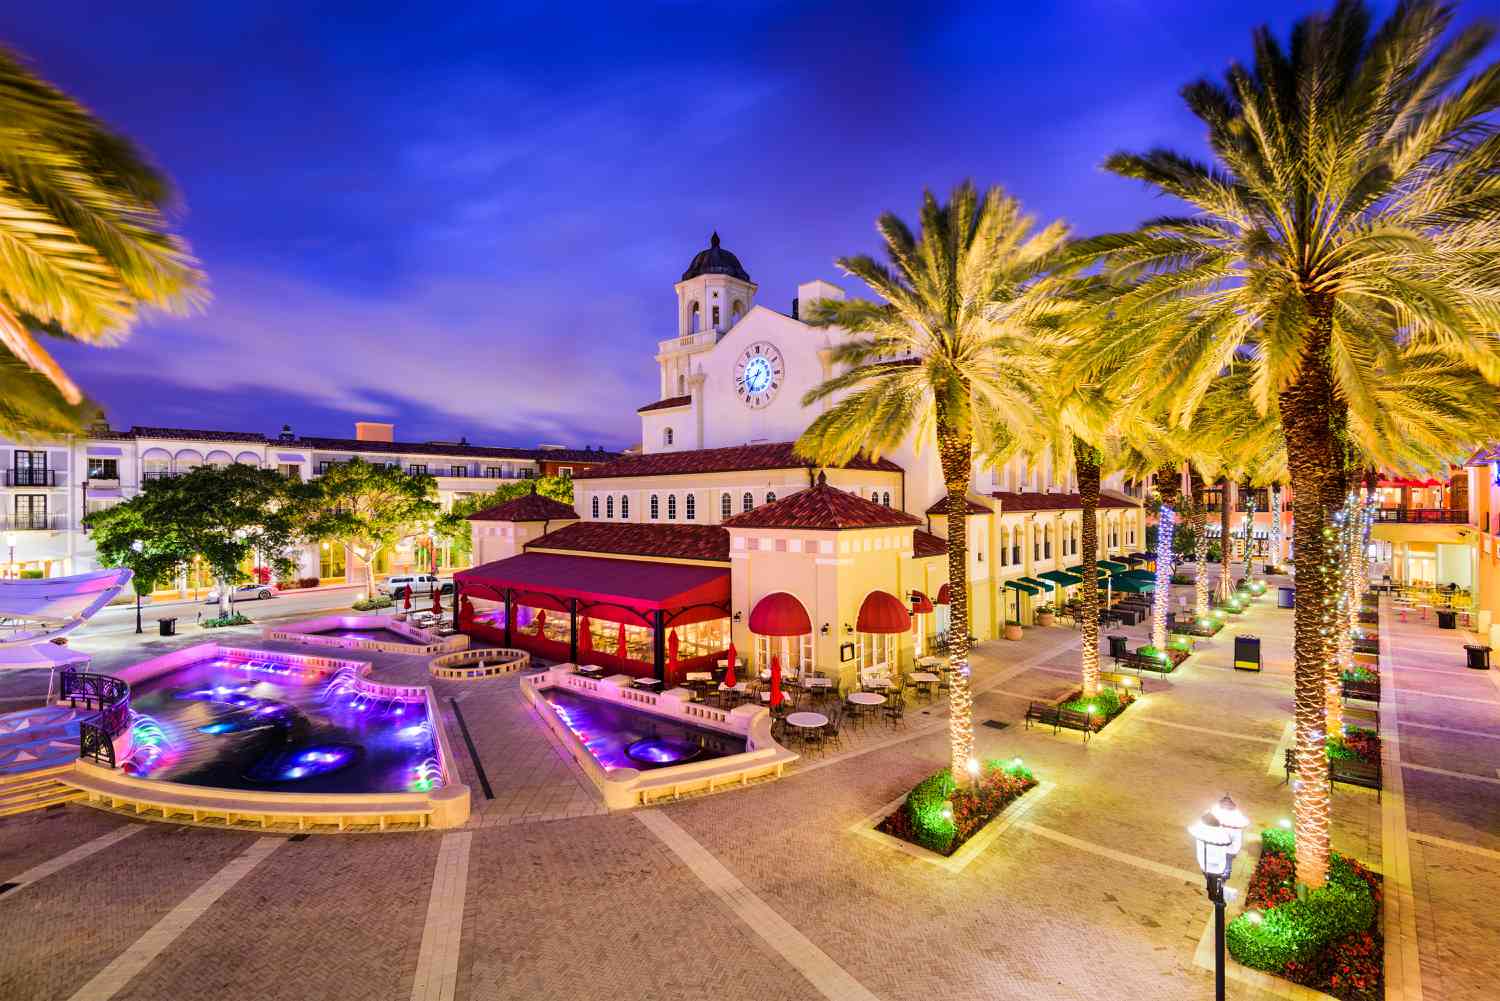 Evening view of plaza with palm trees and fountains at CityPlace in West Palm Beach, Florida